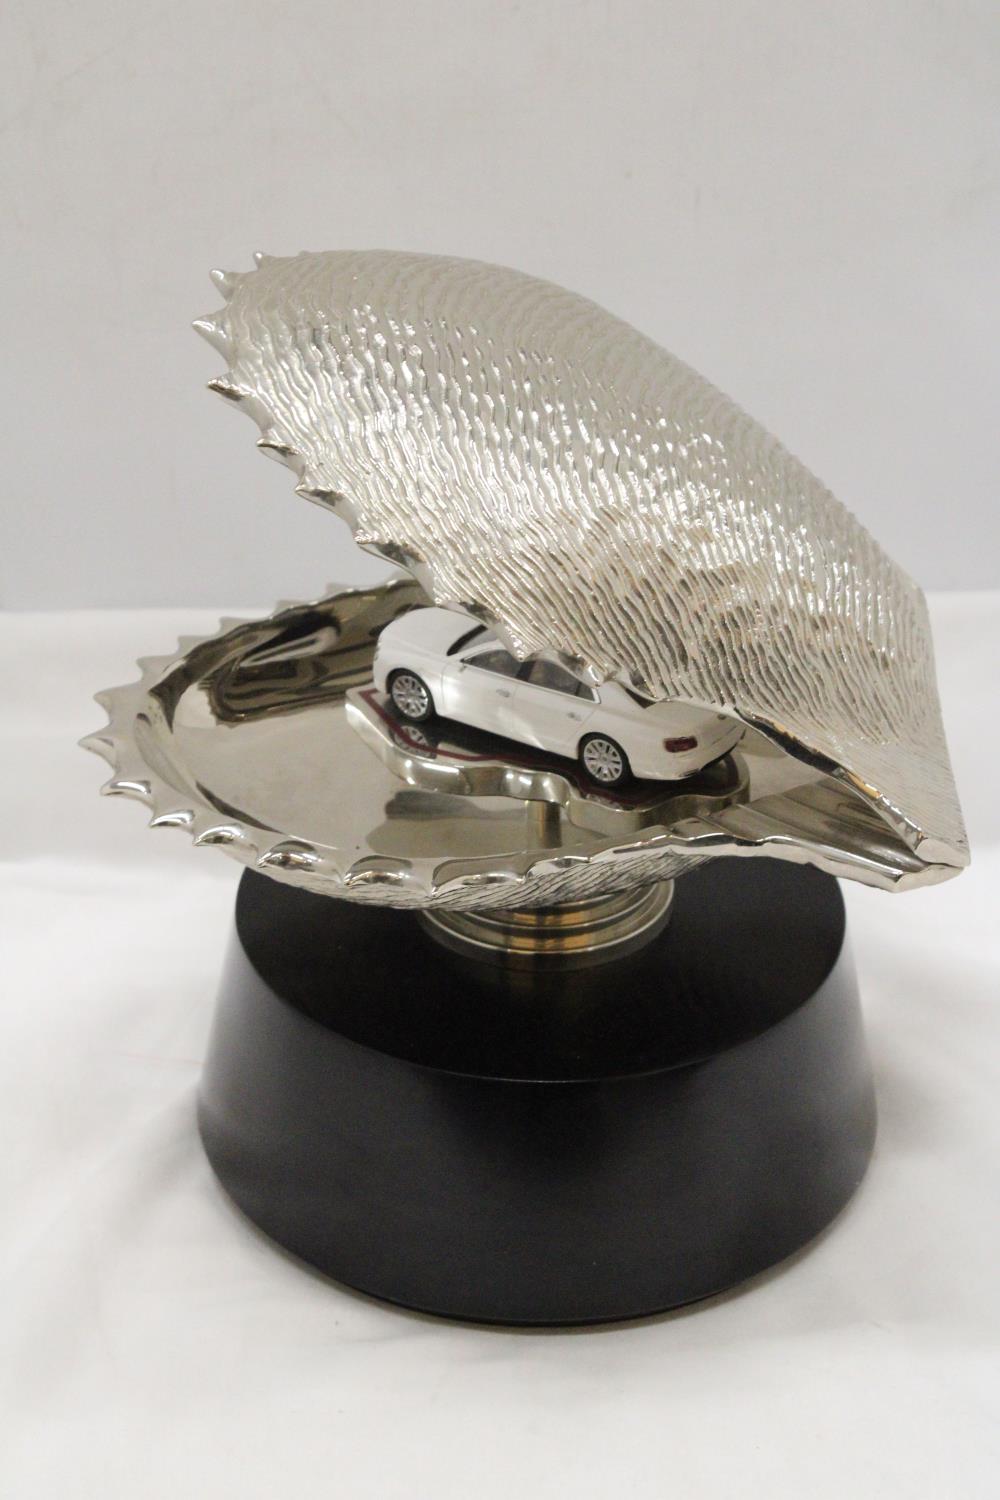 A LARGE CHROME OYSTER SHELL, ENCLOSING A BENTLEY CAR, ON A BASE, HEIGHT 30CM, DIAMETER APPROX 24CM - Image 6 of 6